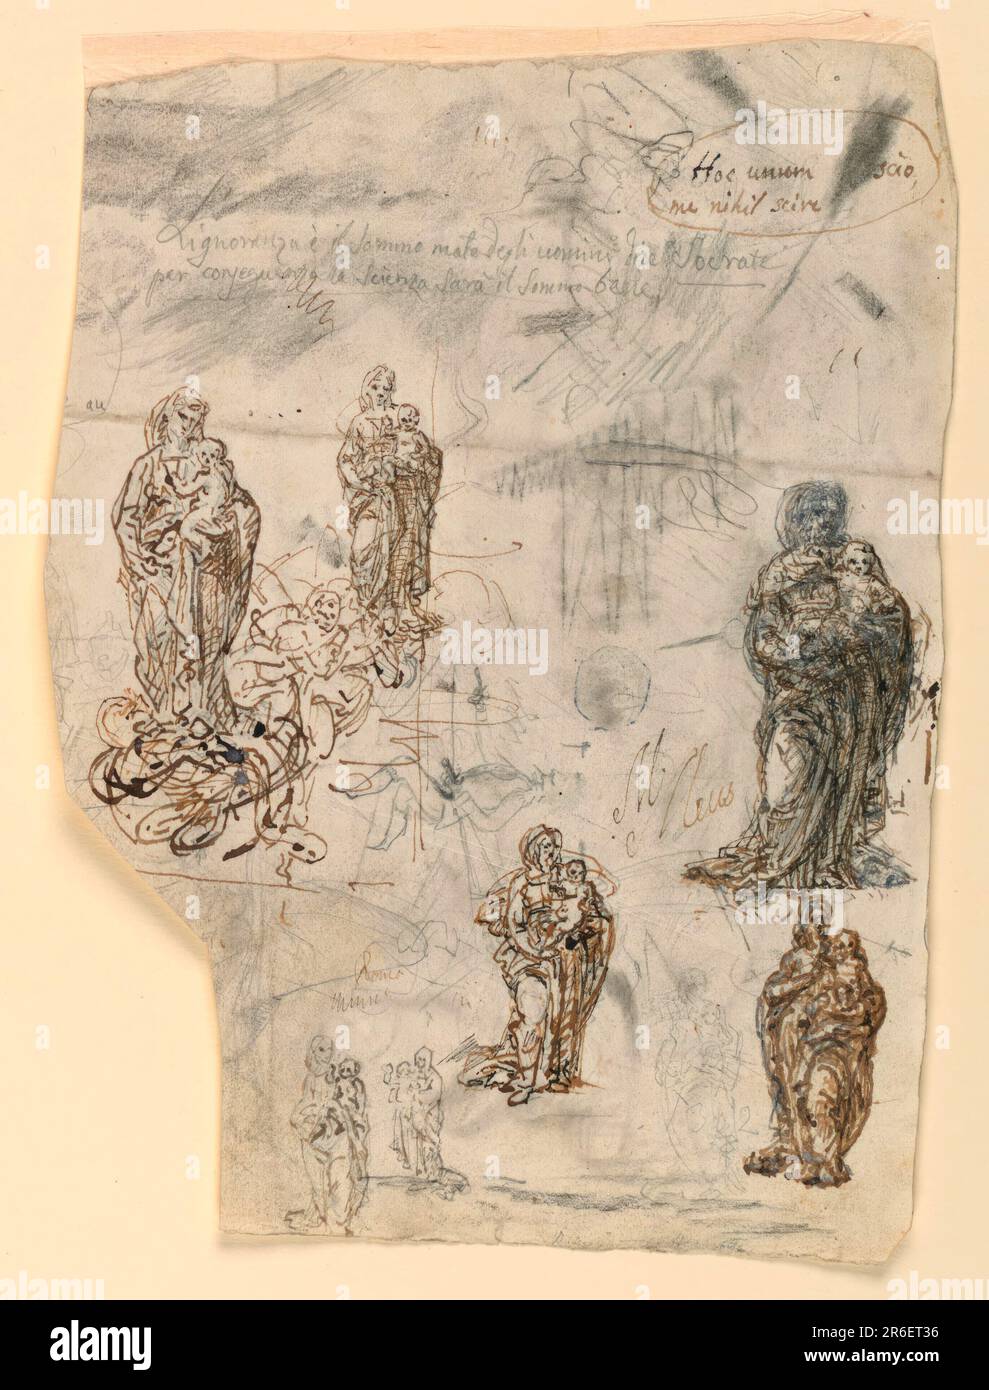 Various sketches depicting the Virgin and Child. Pen and ink, graphite on paper. Date: 1820-1850. Museum: Cooper Hewitt, Smithsonian Design Museum. Stock Photo